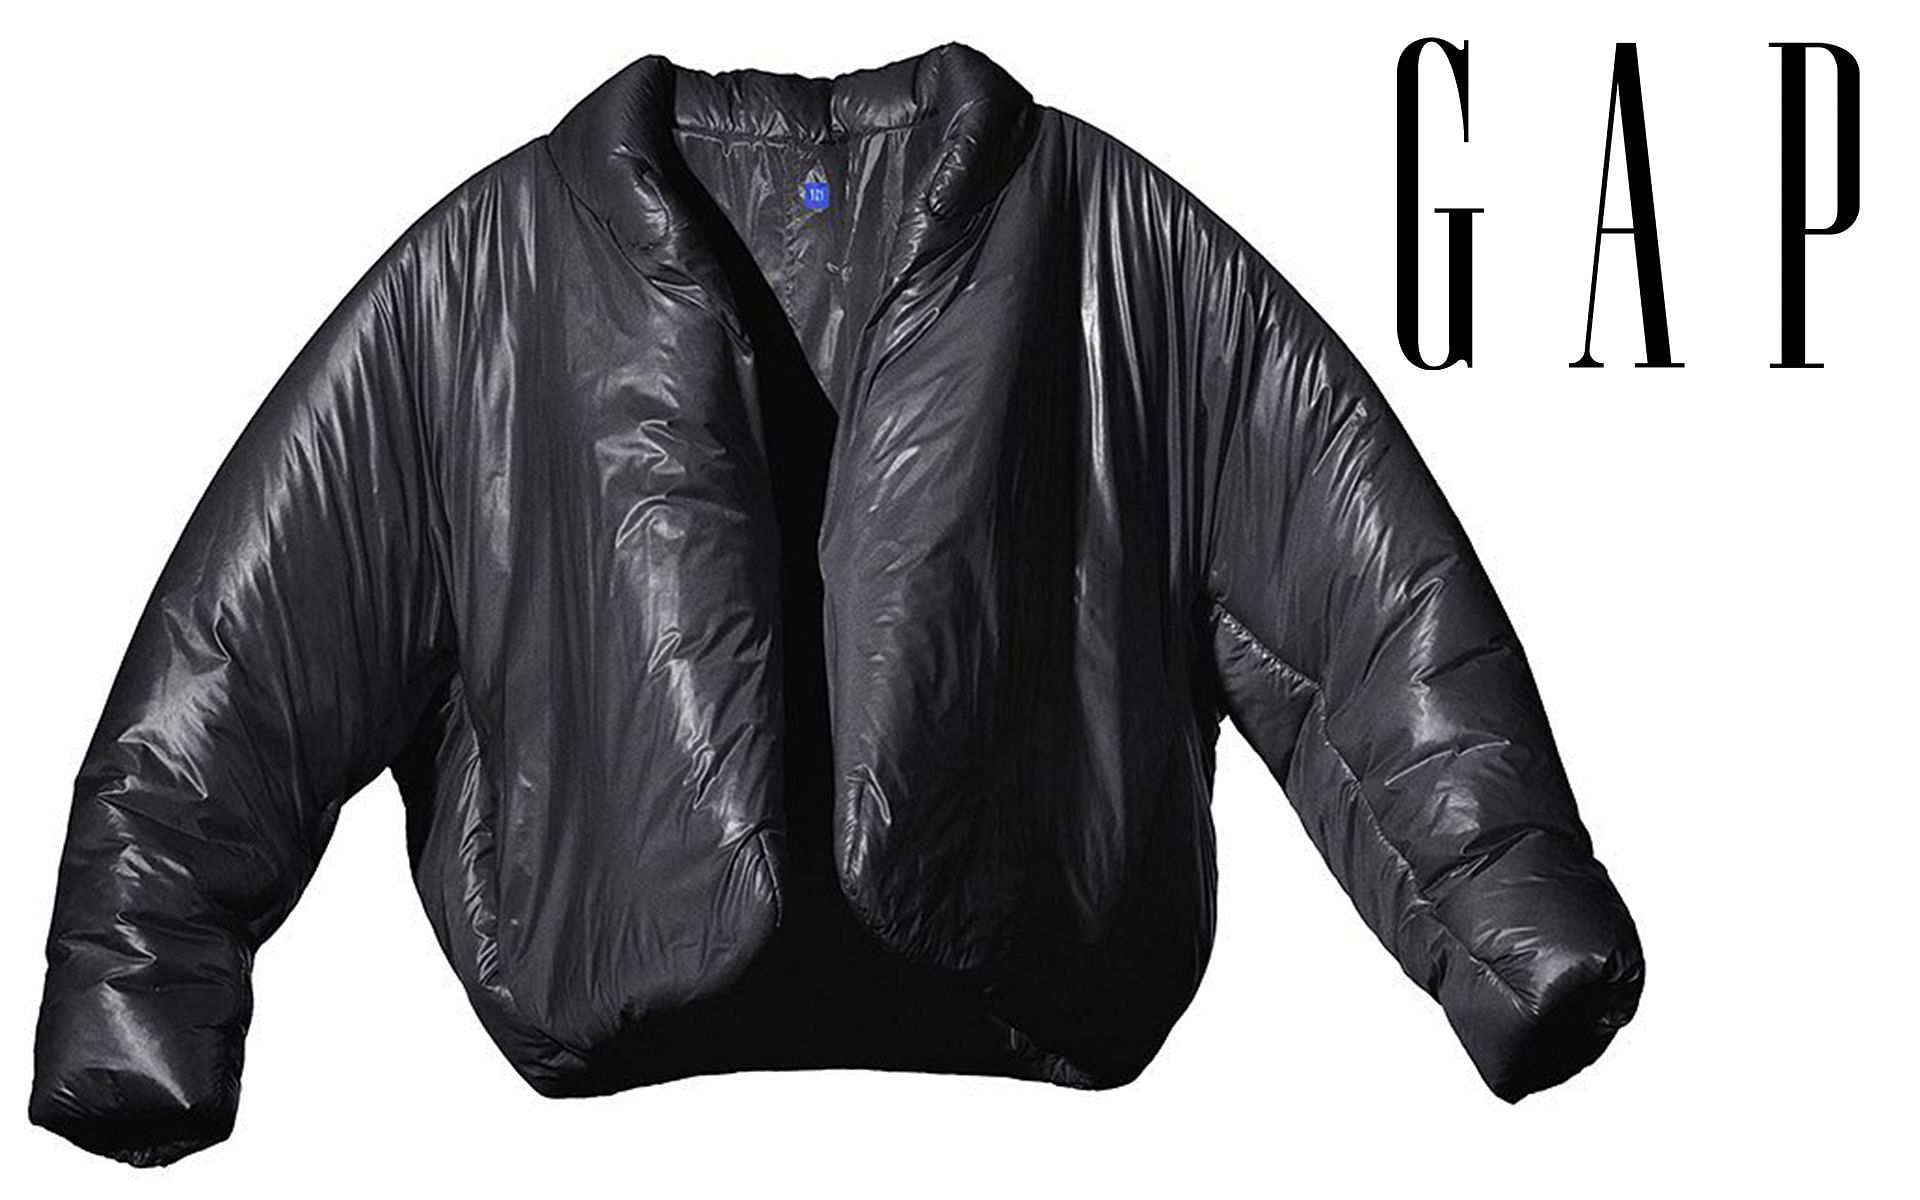 Yeezy x GAP round jacket is all set for the global re-release (Image via Instagram/GAP)